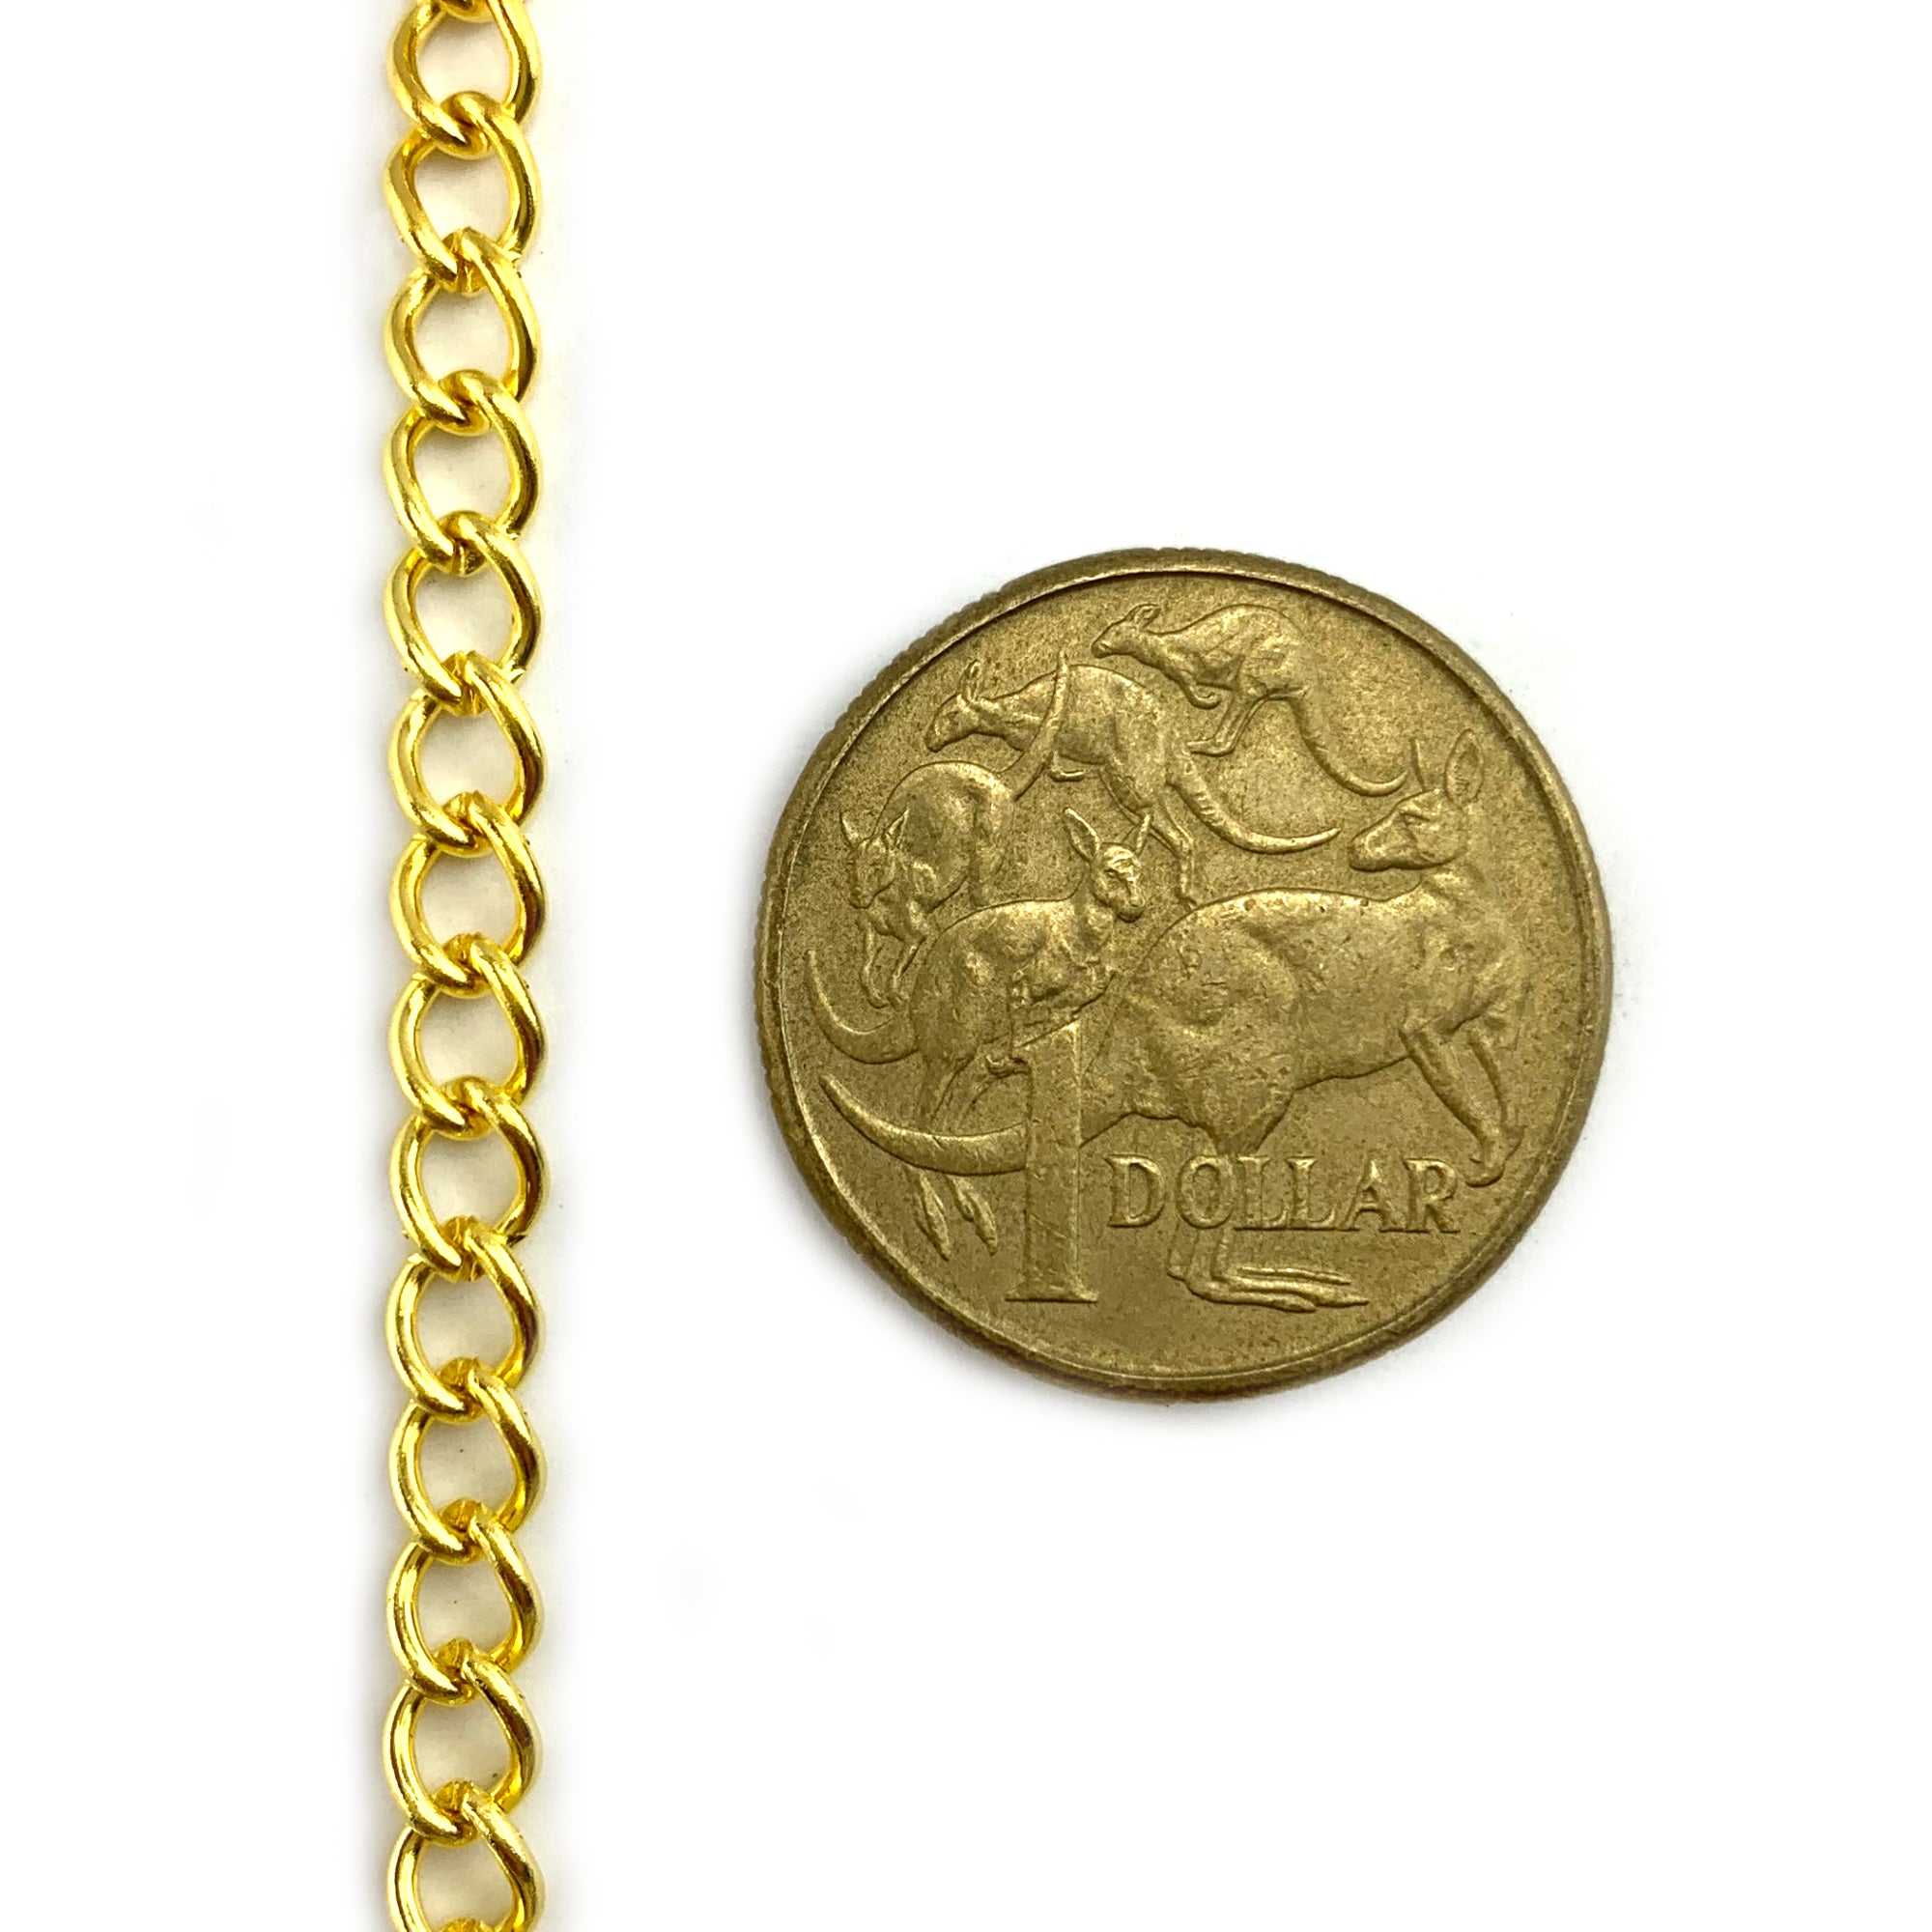 Curb oval jewellery chain is available in gold-plated and silver-plated finishes. Australia